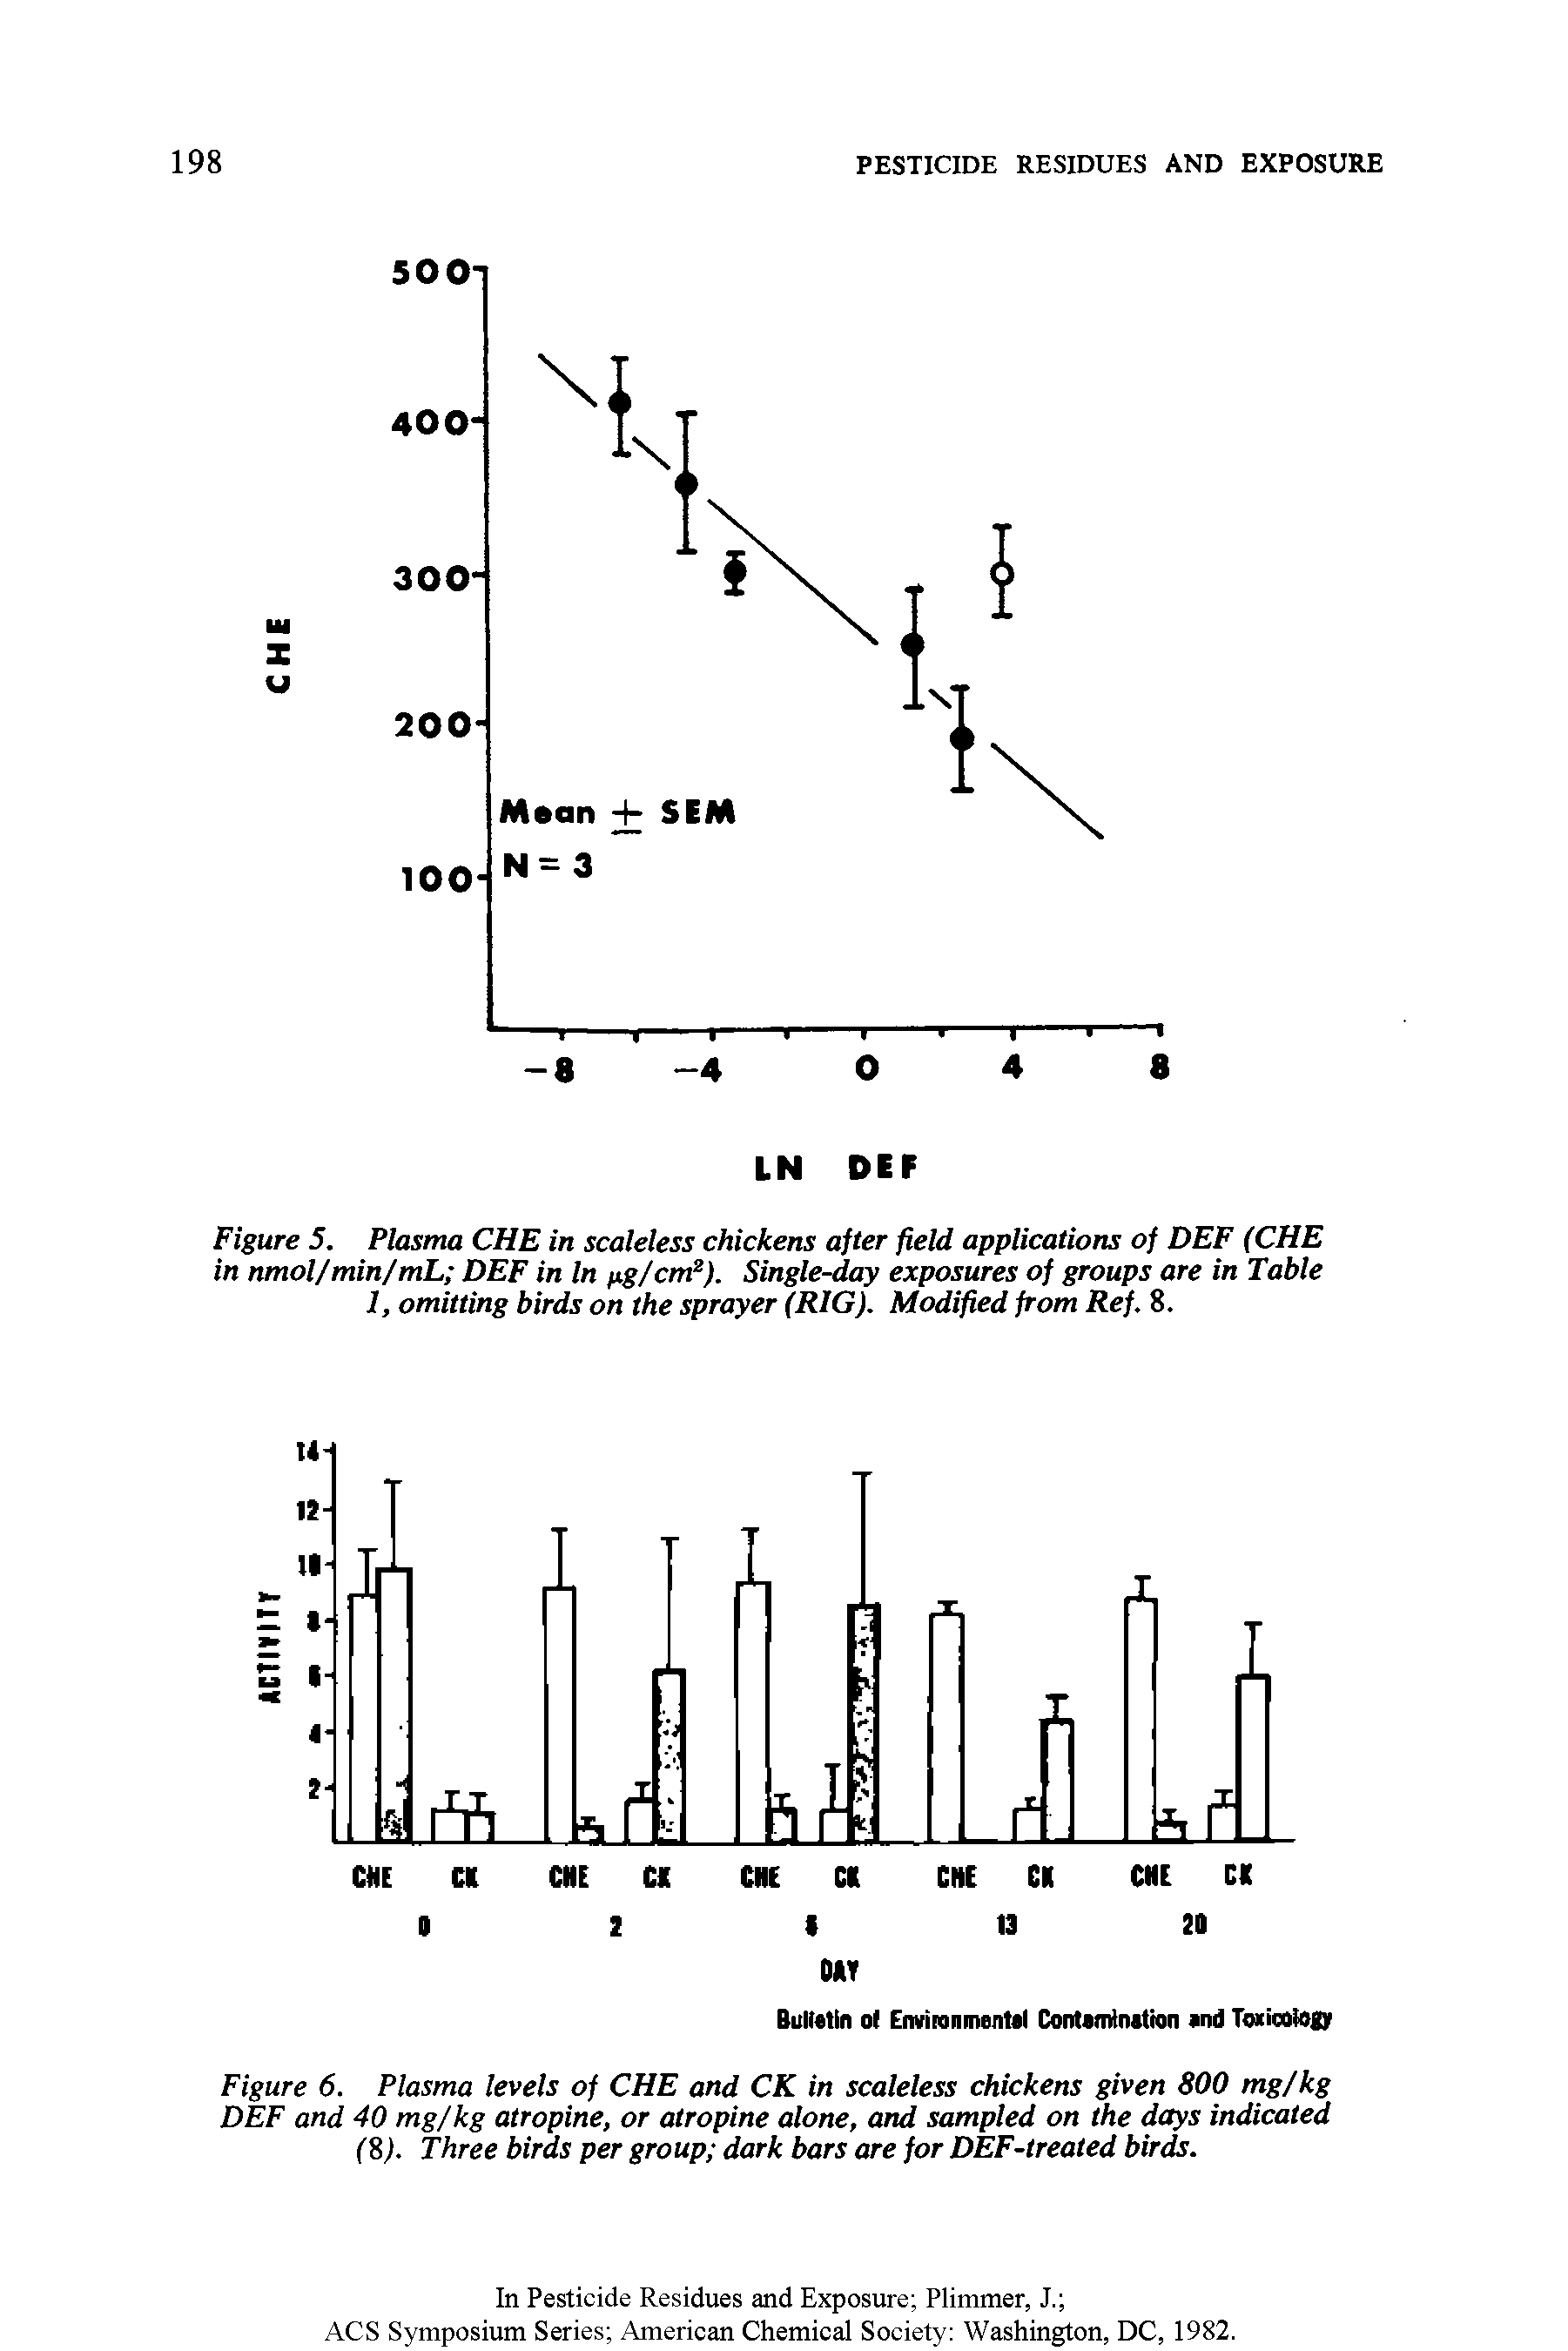 Figure 6. Plasma levels of CHE and CK in scaleless chickens given 800 mg/kg DEF and 40 mg/kg atropine, or atropine alone, and sampled on the days indicated (8). Three birds per group dark bars are for DEF-treated birds.